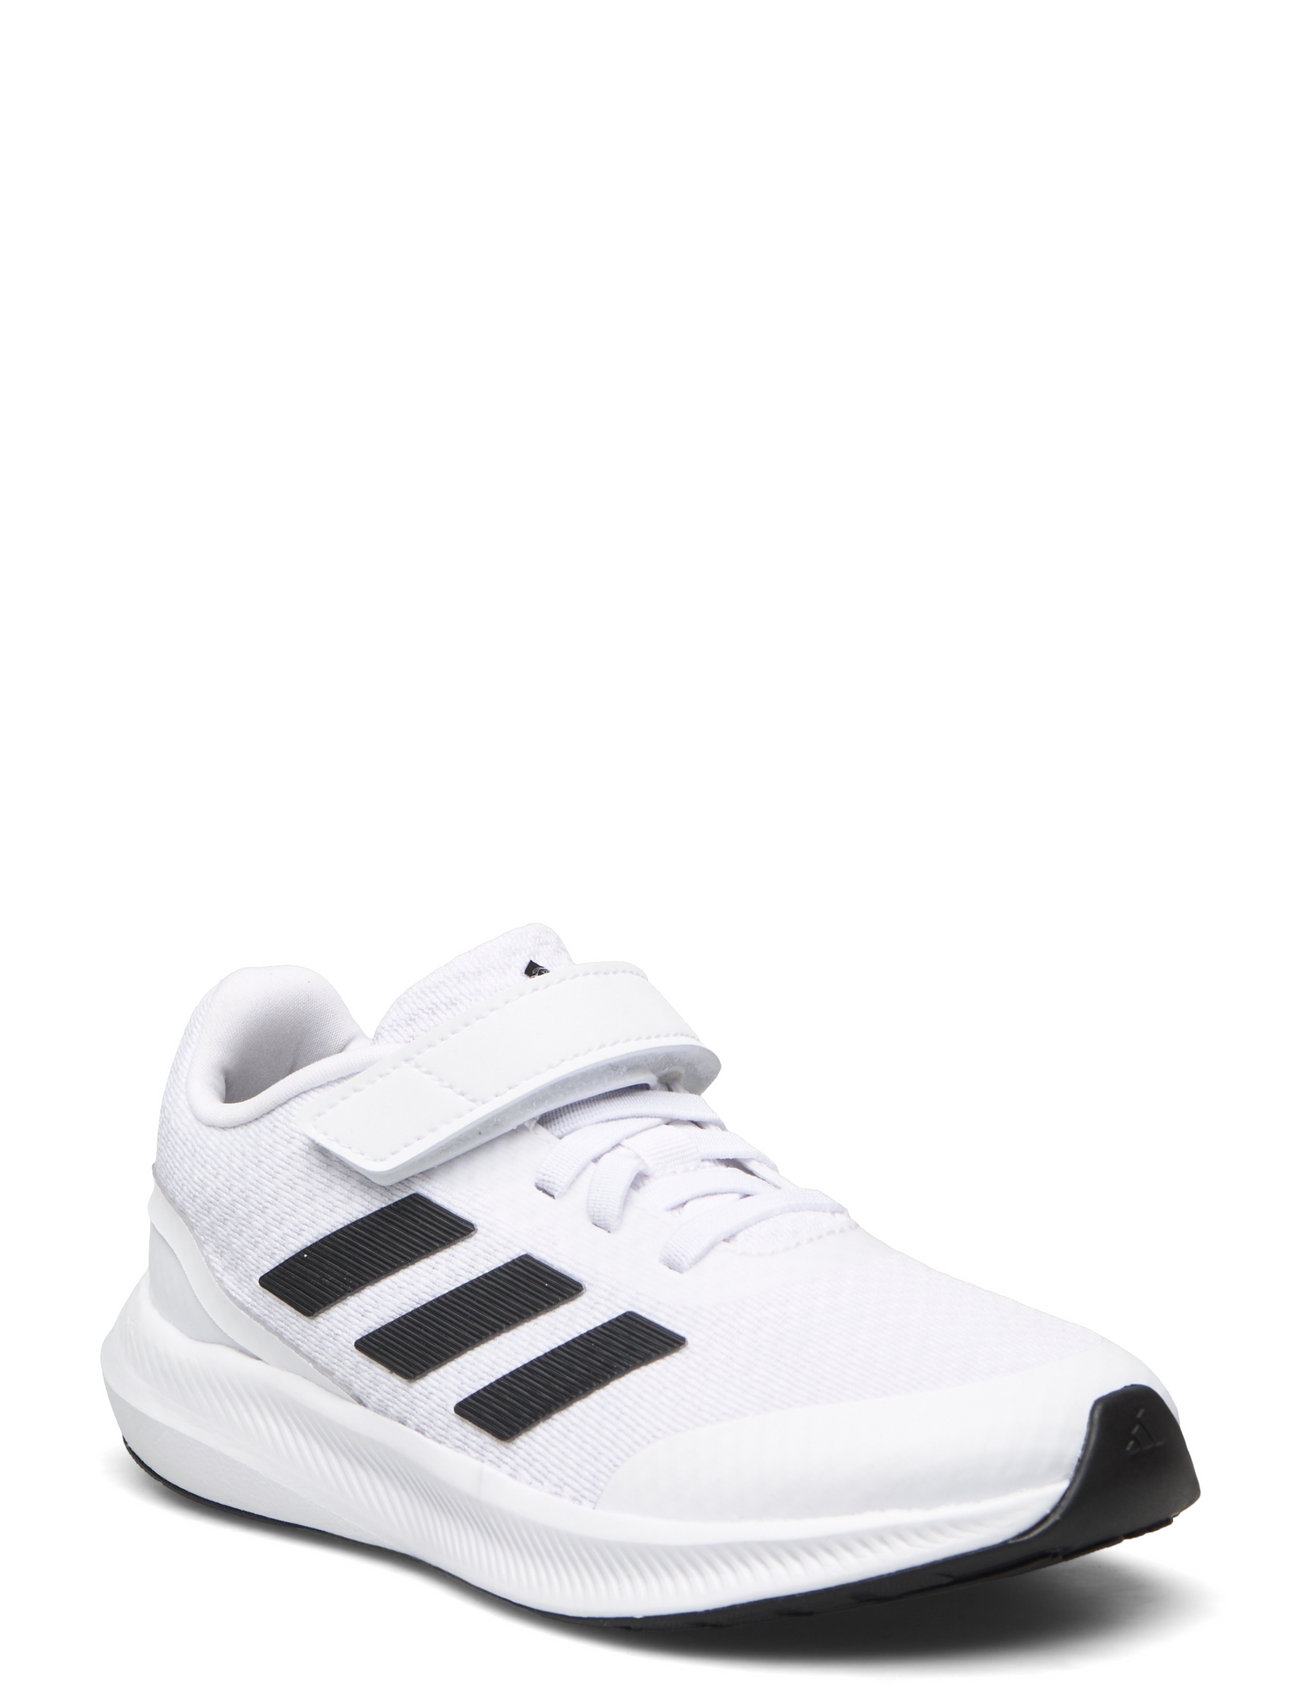 Sneakers Shoes Top Lace Elastic Performance 3.0 Runfalcon adidas - Strap